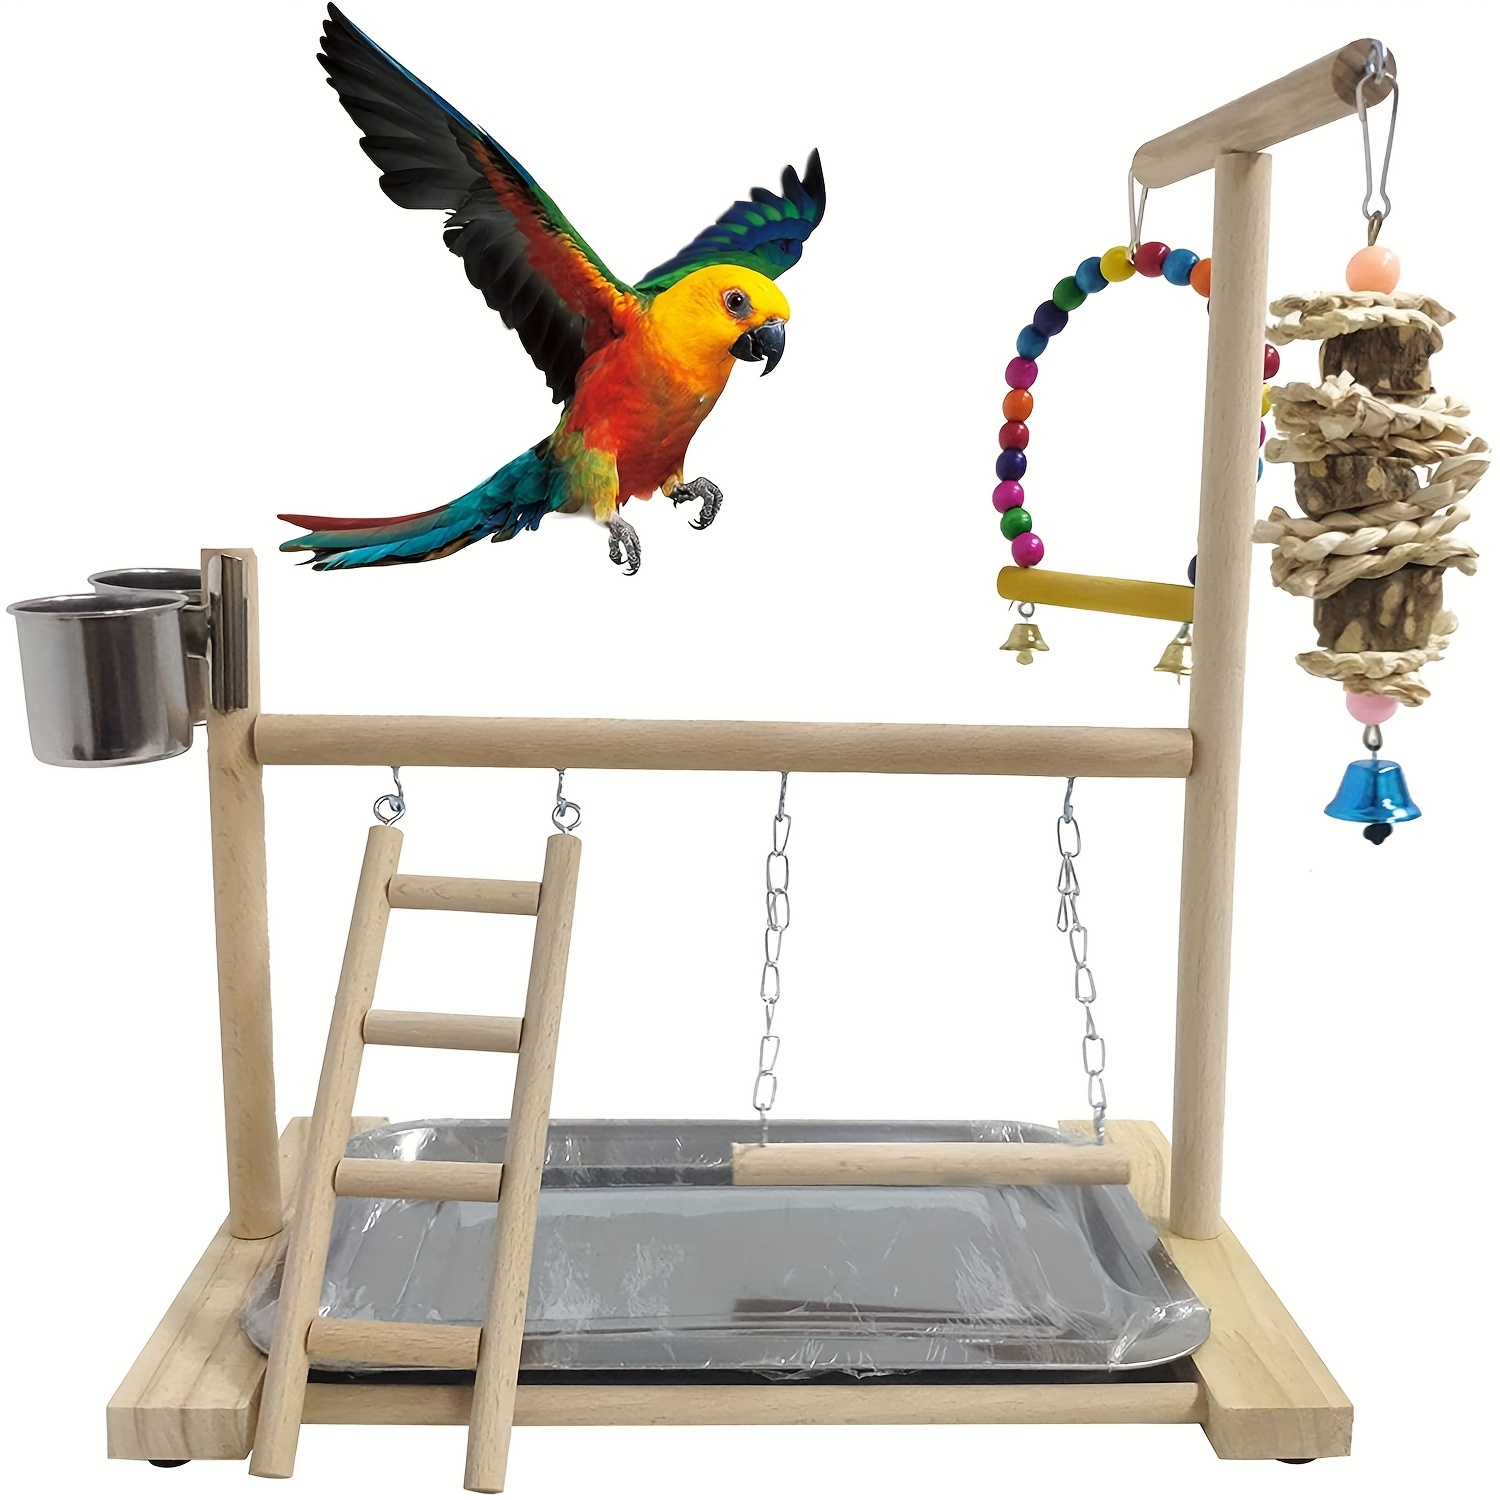 

Interactive Parrot Play Stand With Swing And Chew Toys - Durable Wood Construction For Medium To Small Birds, Ideal For Lovebirds & Cockatiels